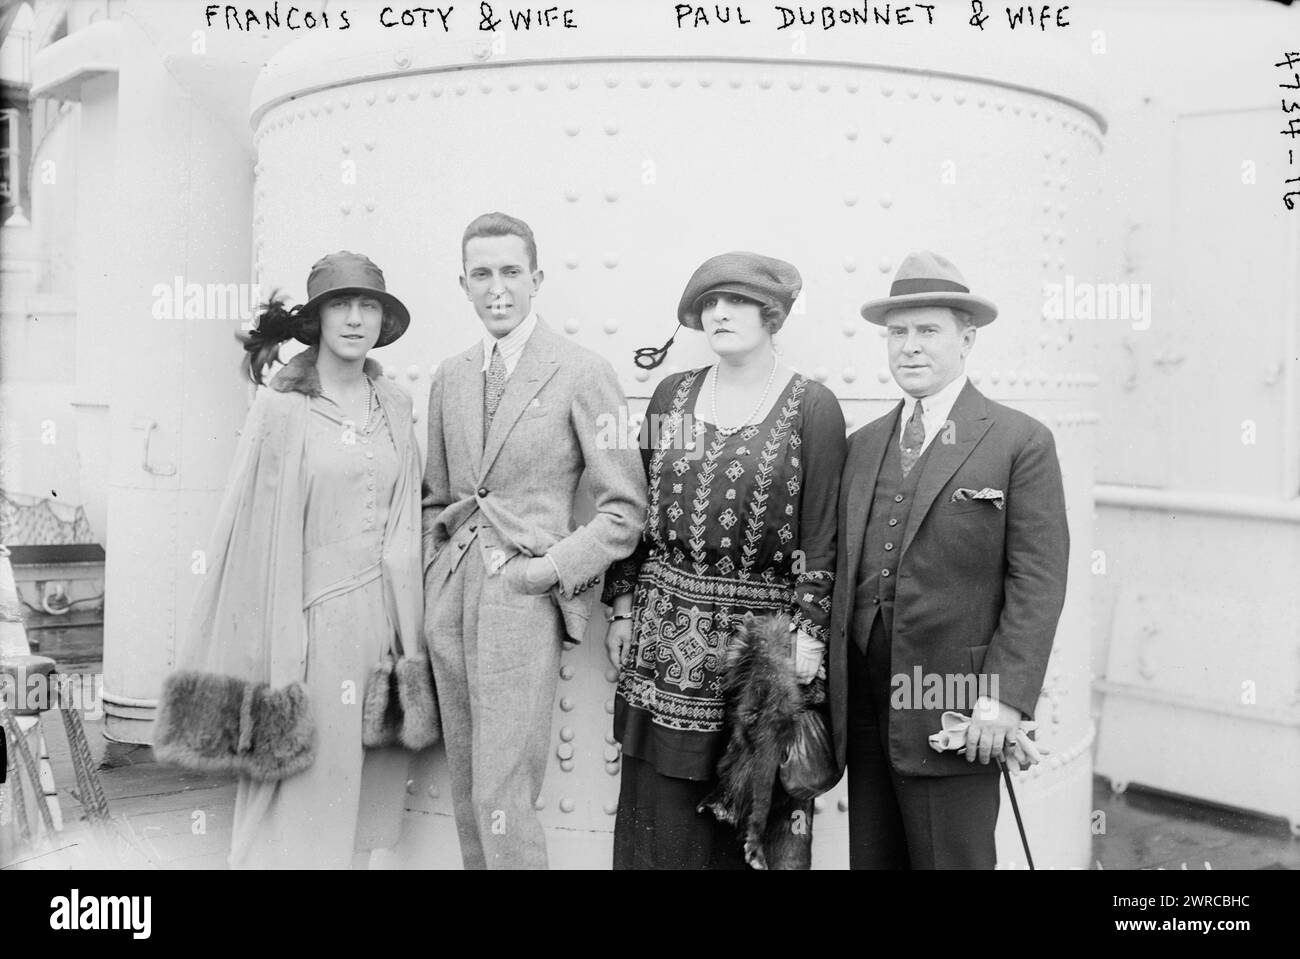 Francois Coty & wife, Paul Dubonnet & wife, Photograph shows (left to right) Mrs. Dubonnet (Christiane Coty), liquor merchant Paul Dubonnet, Mrs. Coty (Yvonne Alexandrine LeBaron), French perfumer Francois Coty., between ca. 1915 and ca. 1920, Glass negatives, 1 negative: glass Stock Photo